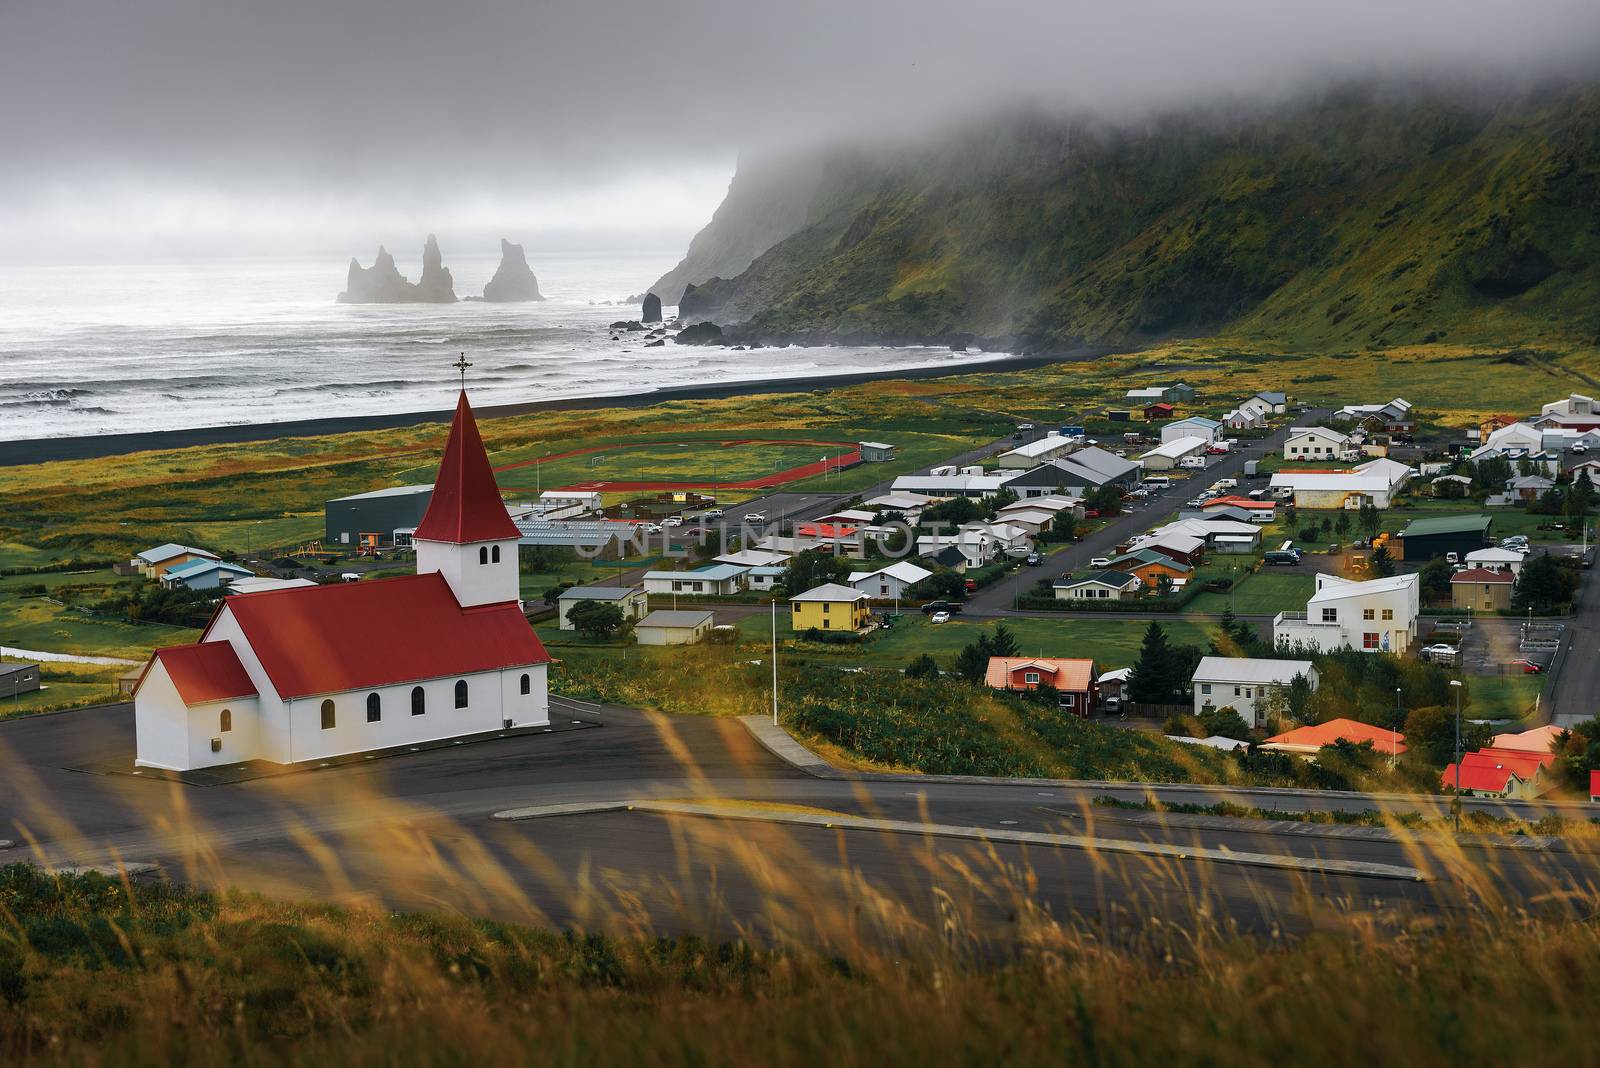 Heavy clouds over the village of Vik i Myrdal in Iceland by nickfox